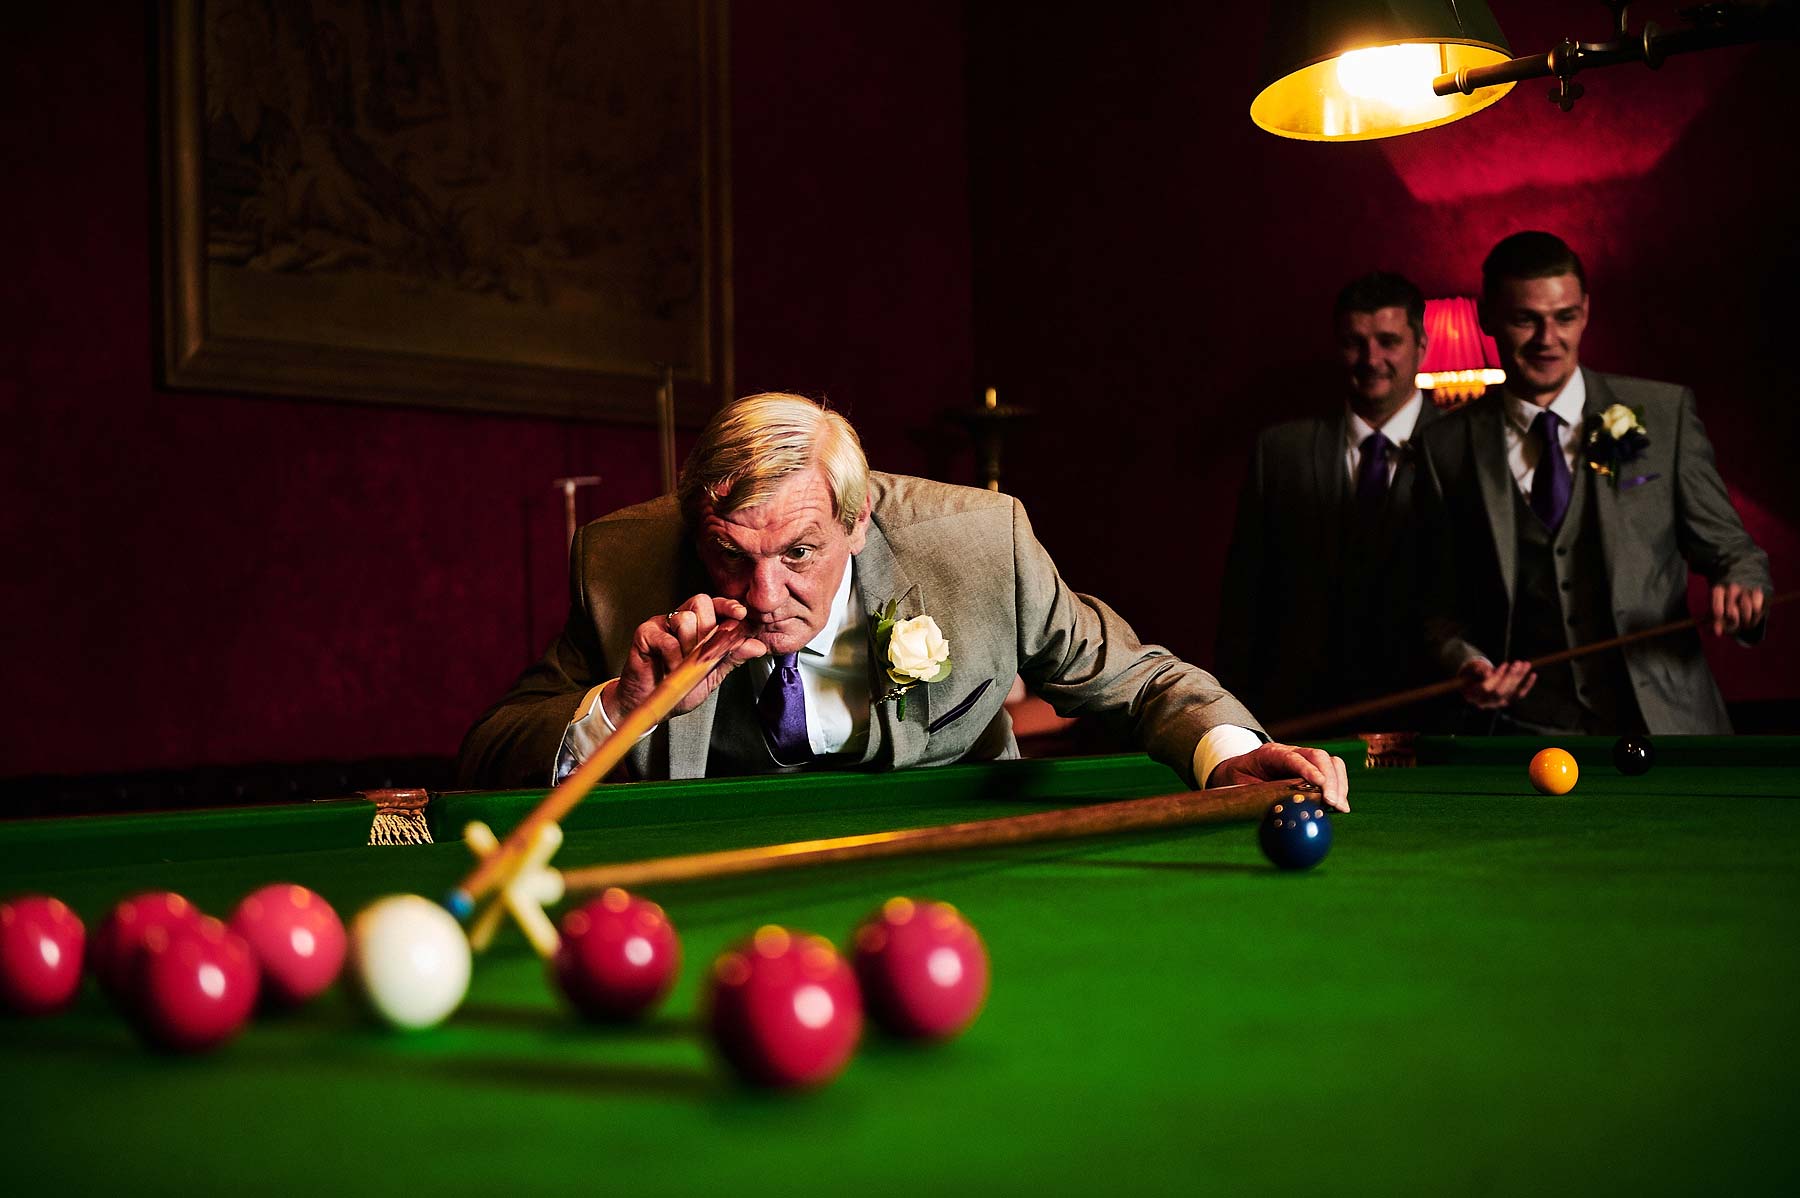 Creative fun portraits with the groomsmen in the billiards room at Allerton Castle in Yorkshire by Documentary Wedding Photographer Stuart James